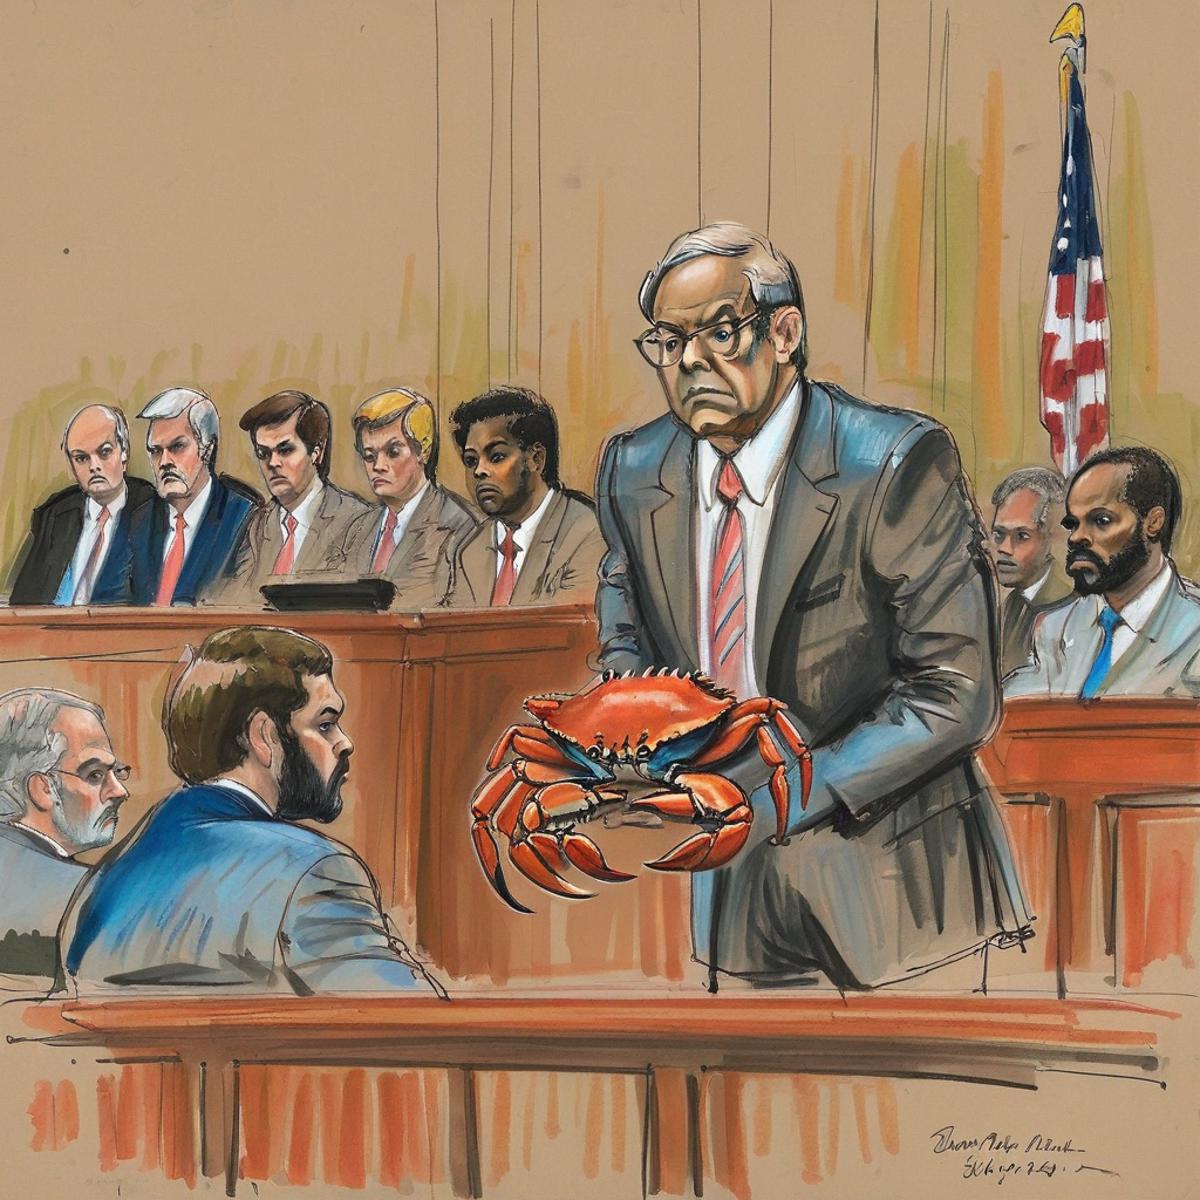 A courtroom scene featuring a man holding a crab in front of a judge and other people.